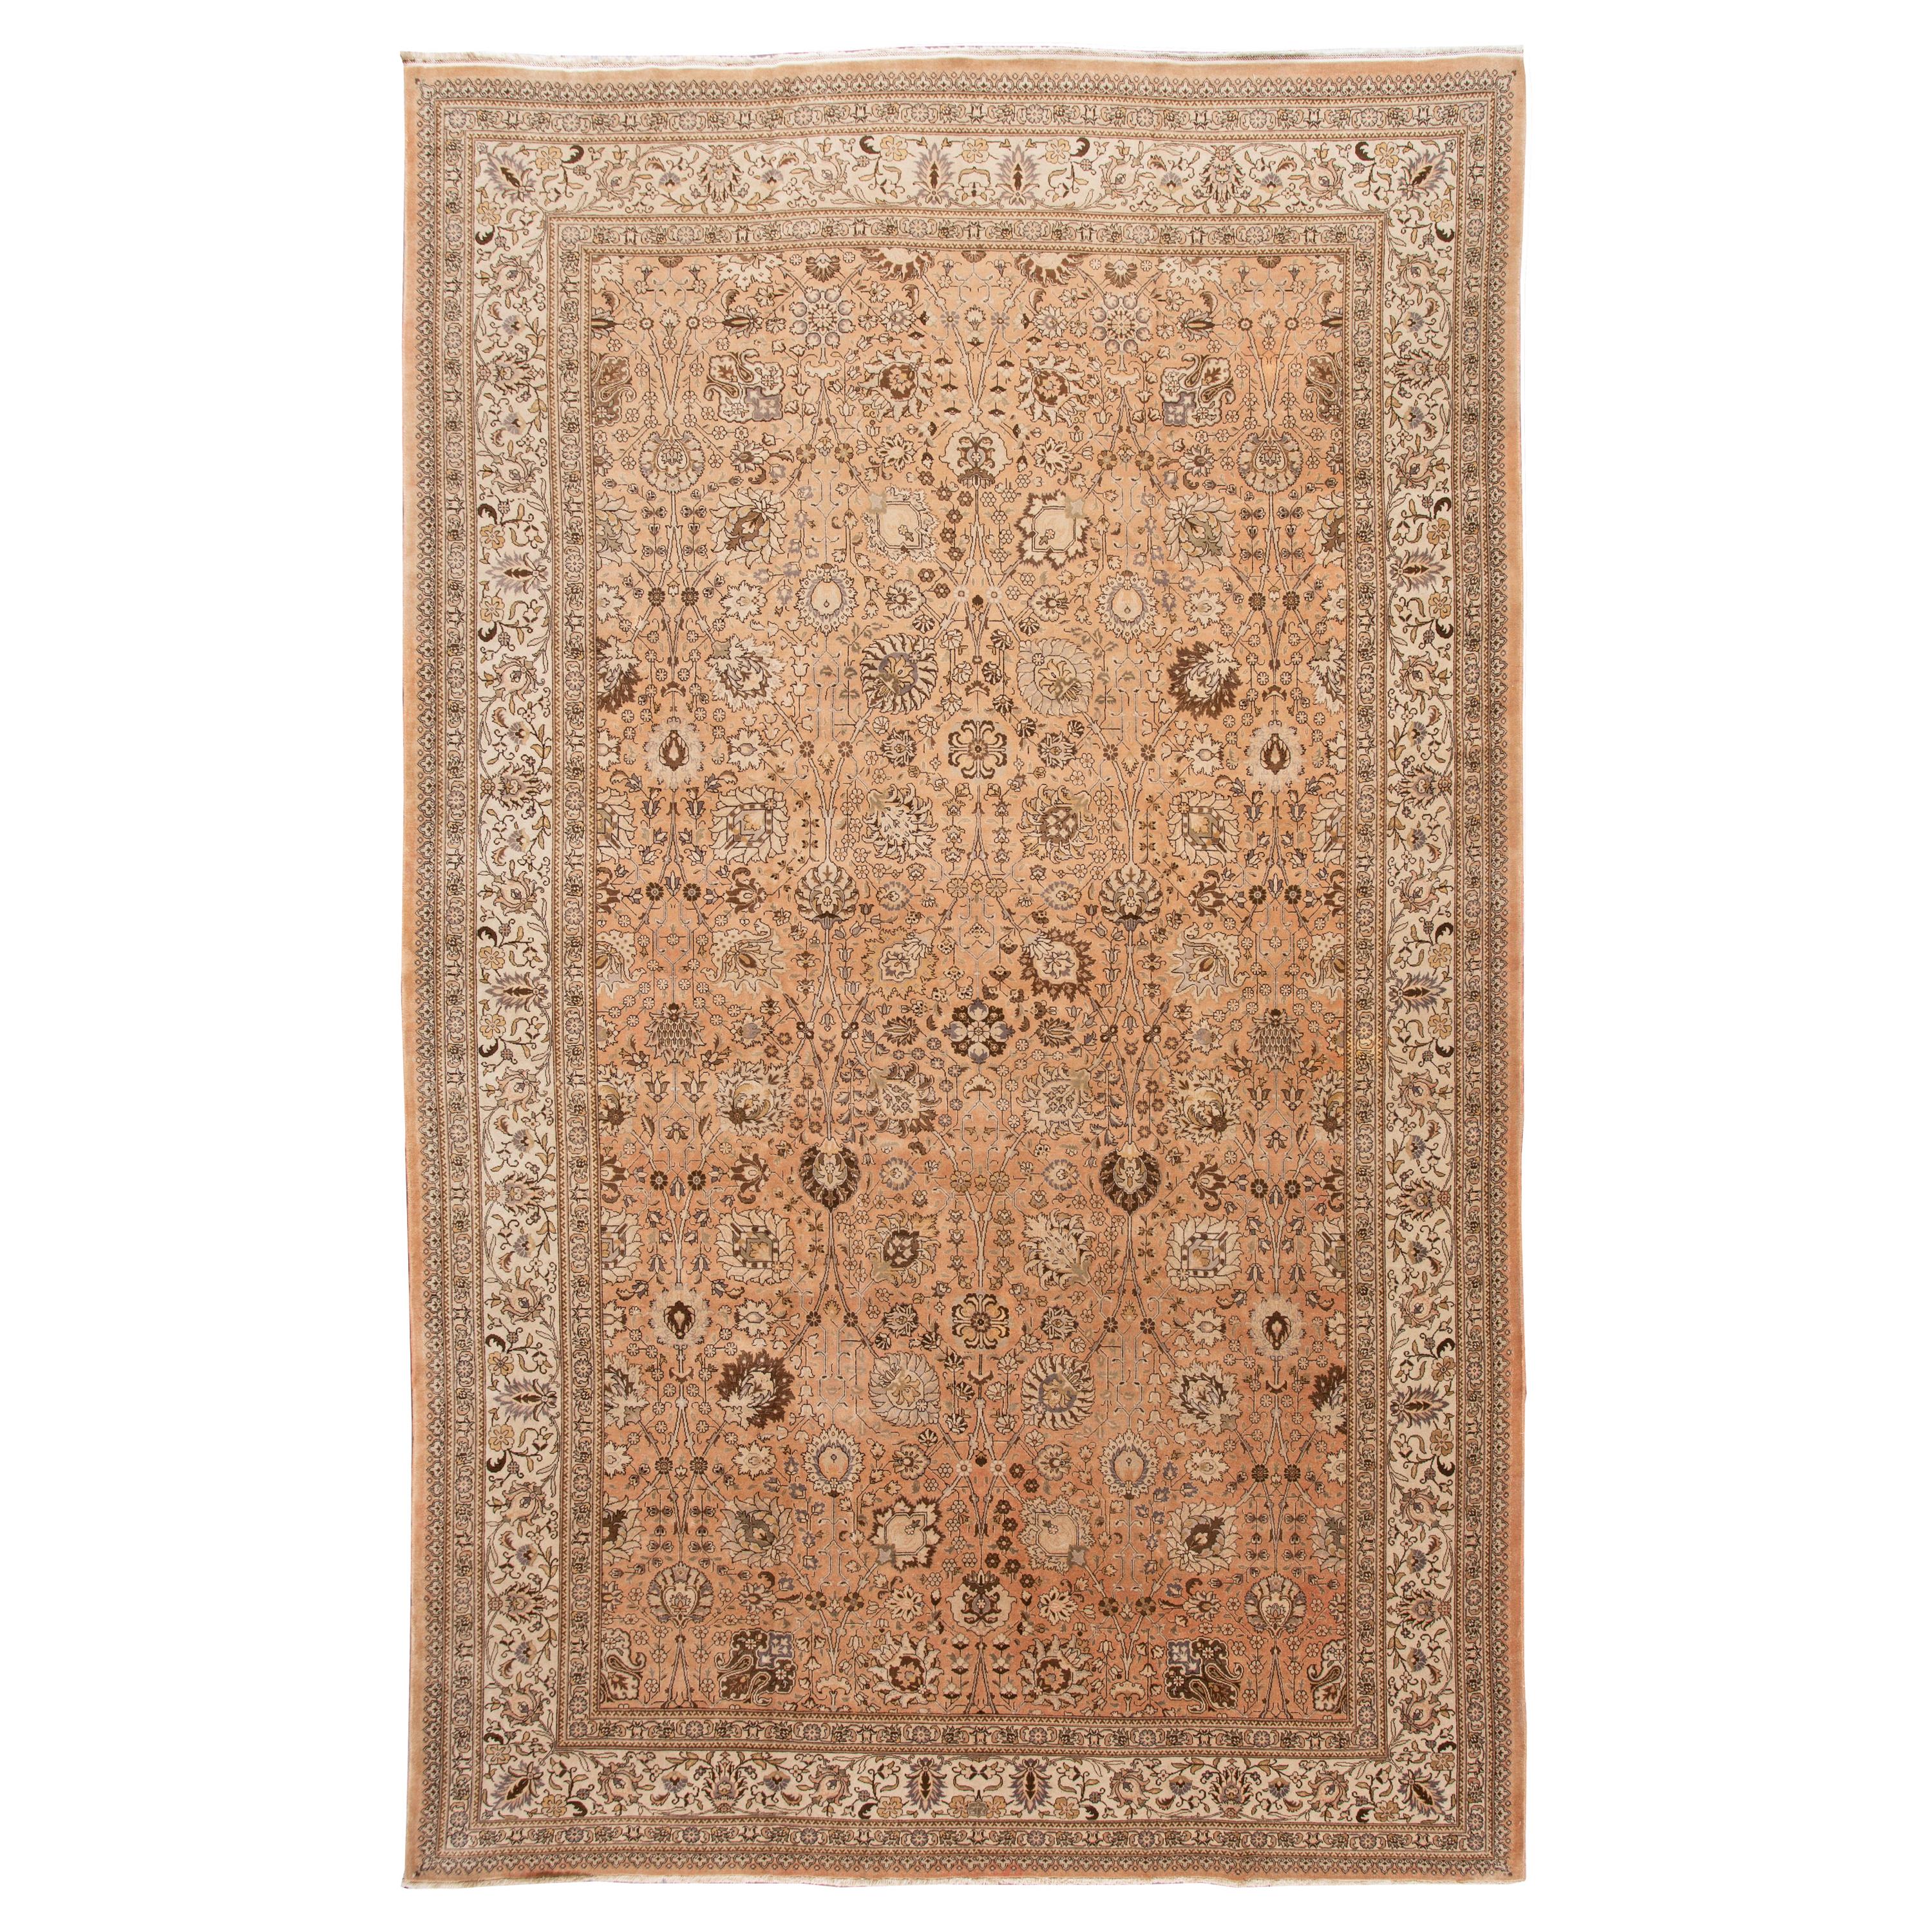 Early 20th Century Antique Tabriz Wool Rug For Sale